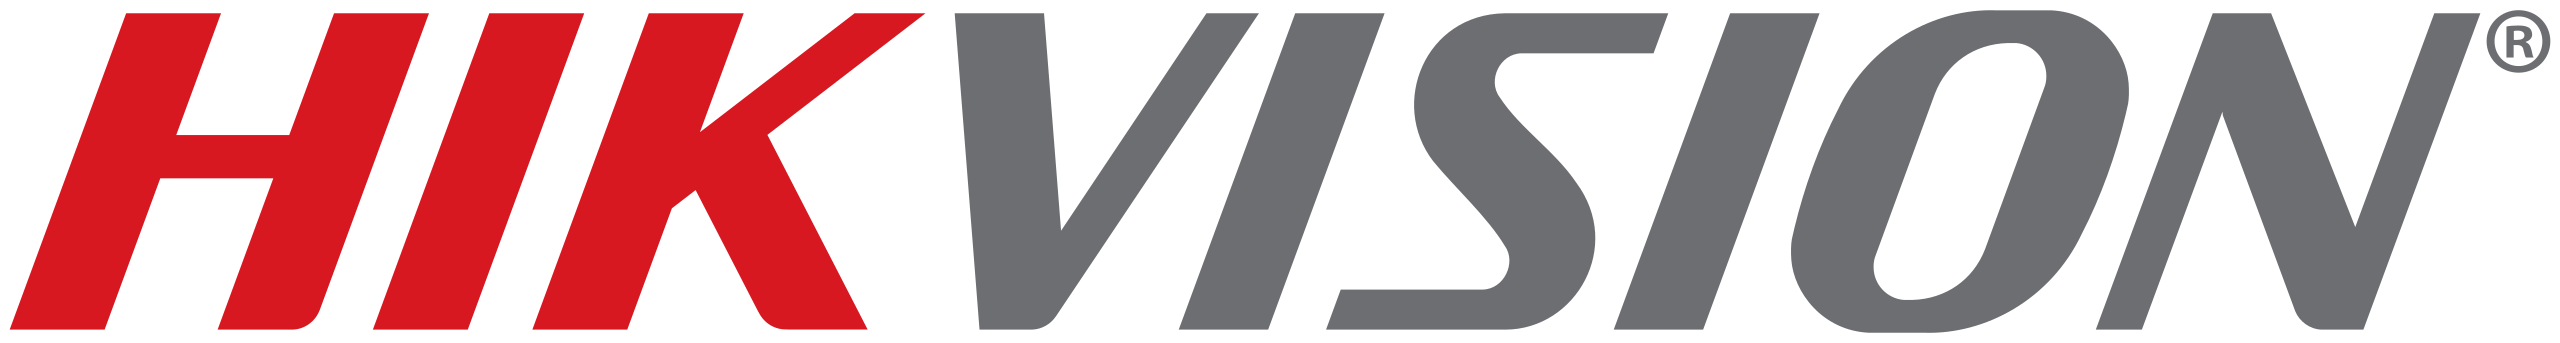 Hikvision logo with no background